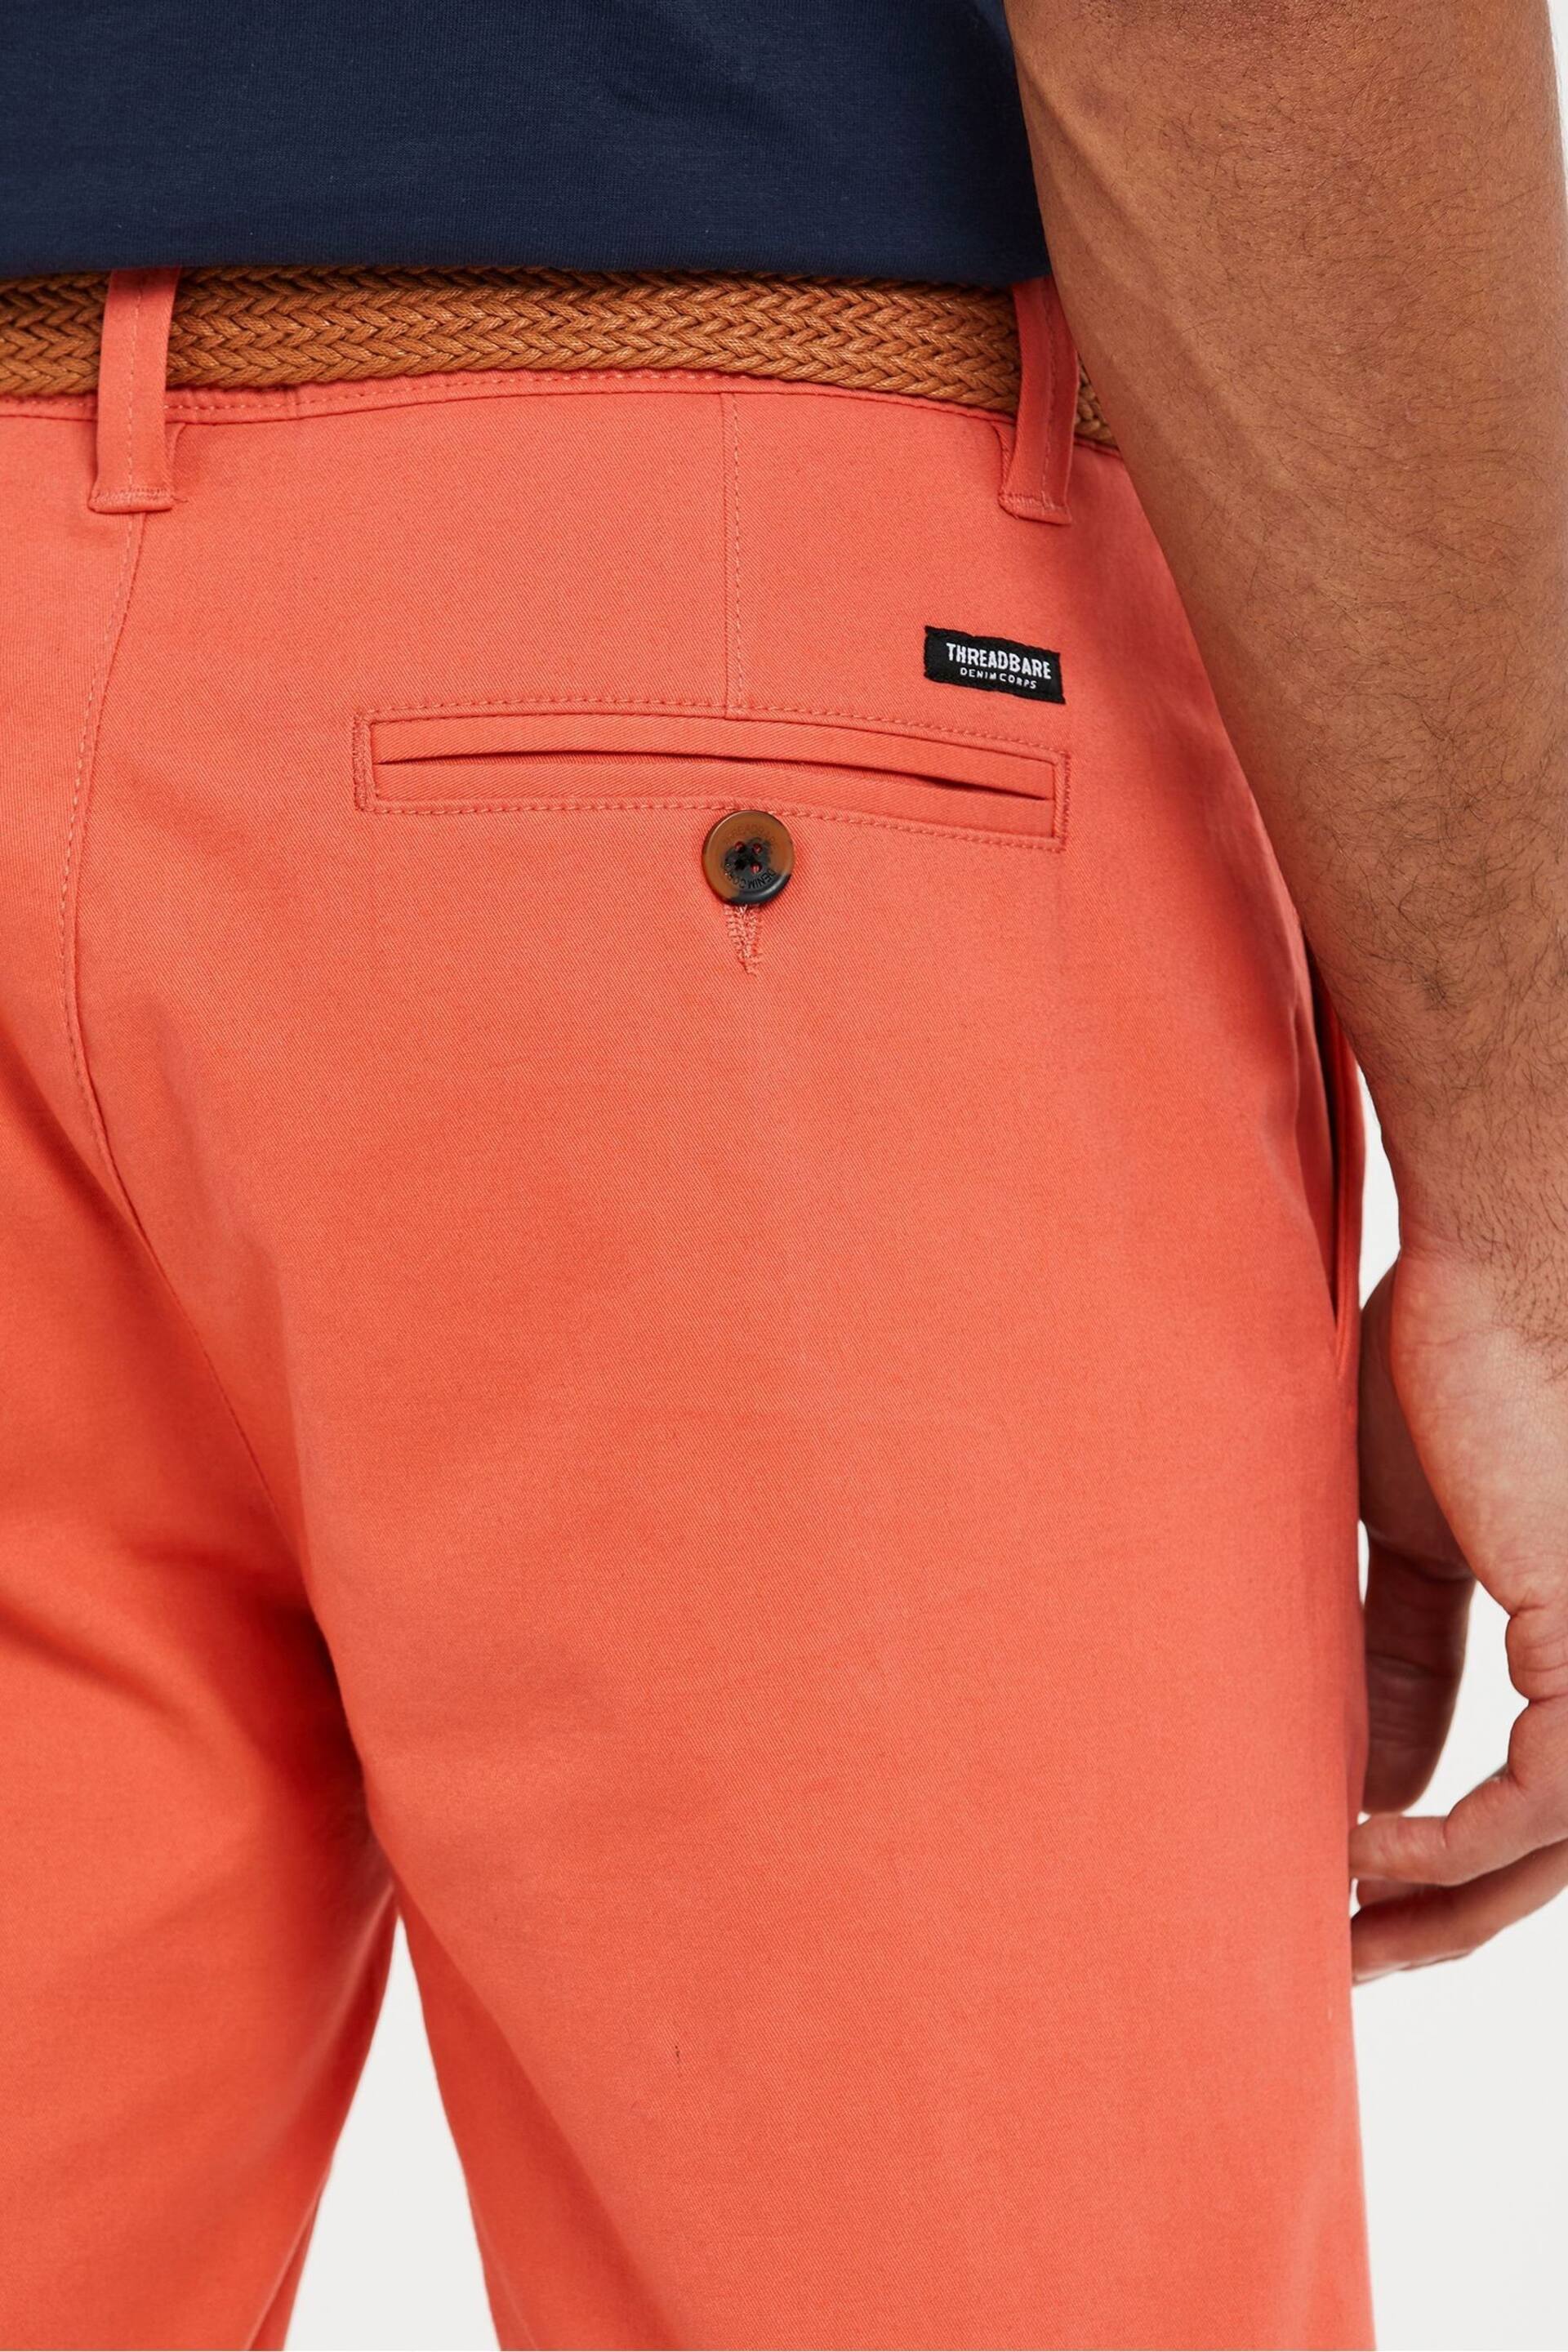 Threadbare Coral Pink Cotton Stretch Turn-Up Chino Shorts with Woven Belt - Image 4 of 4